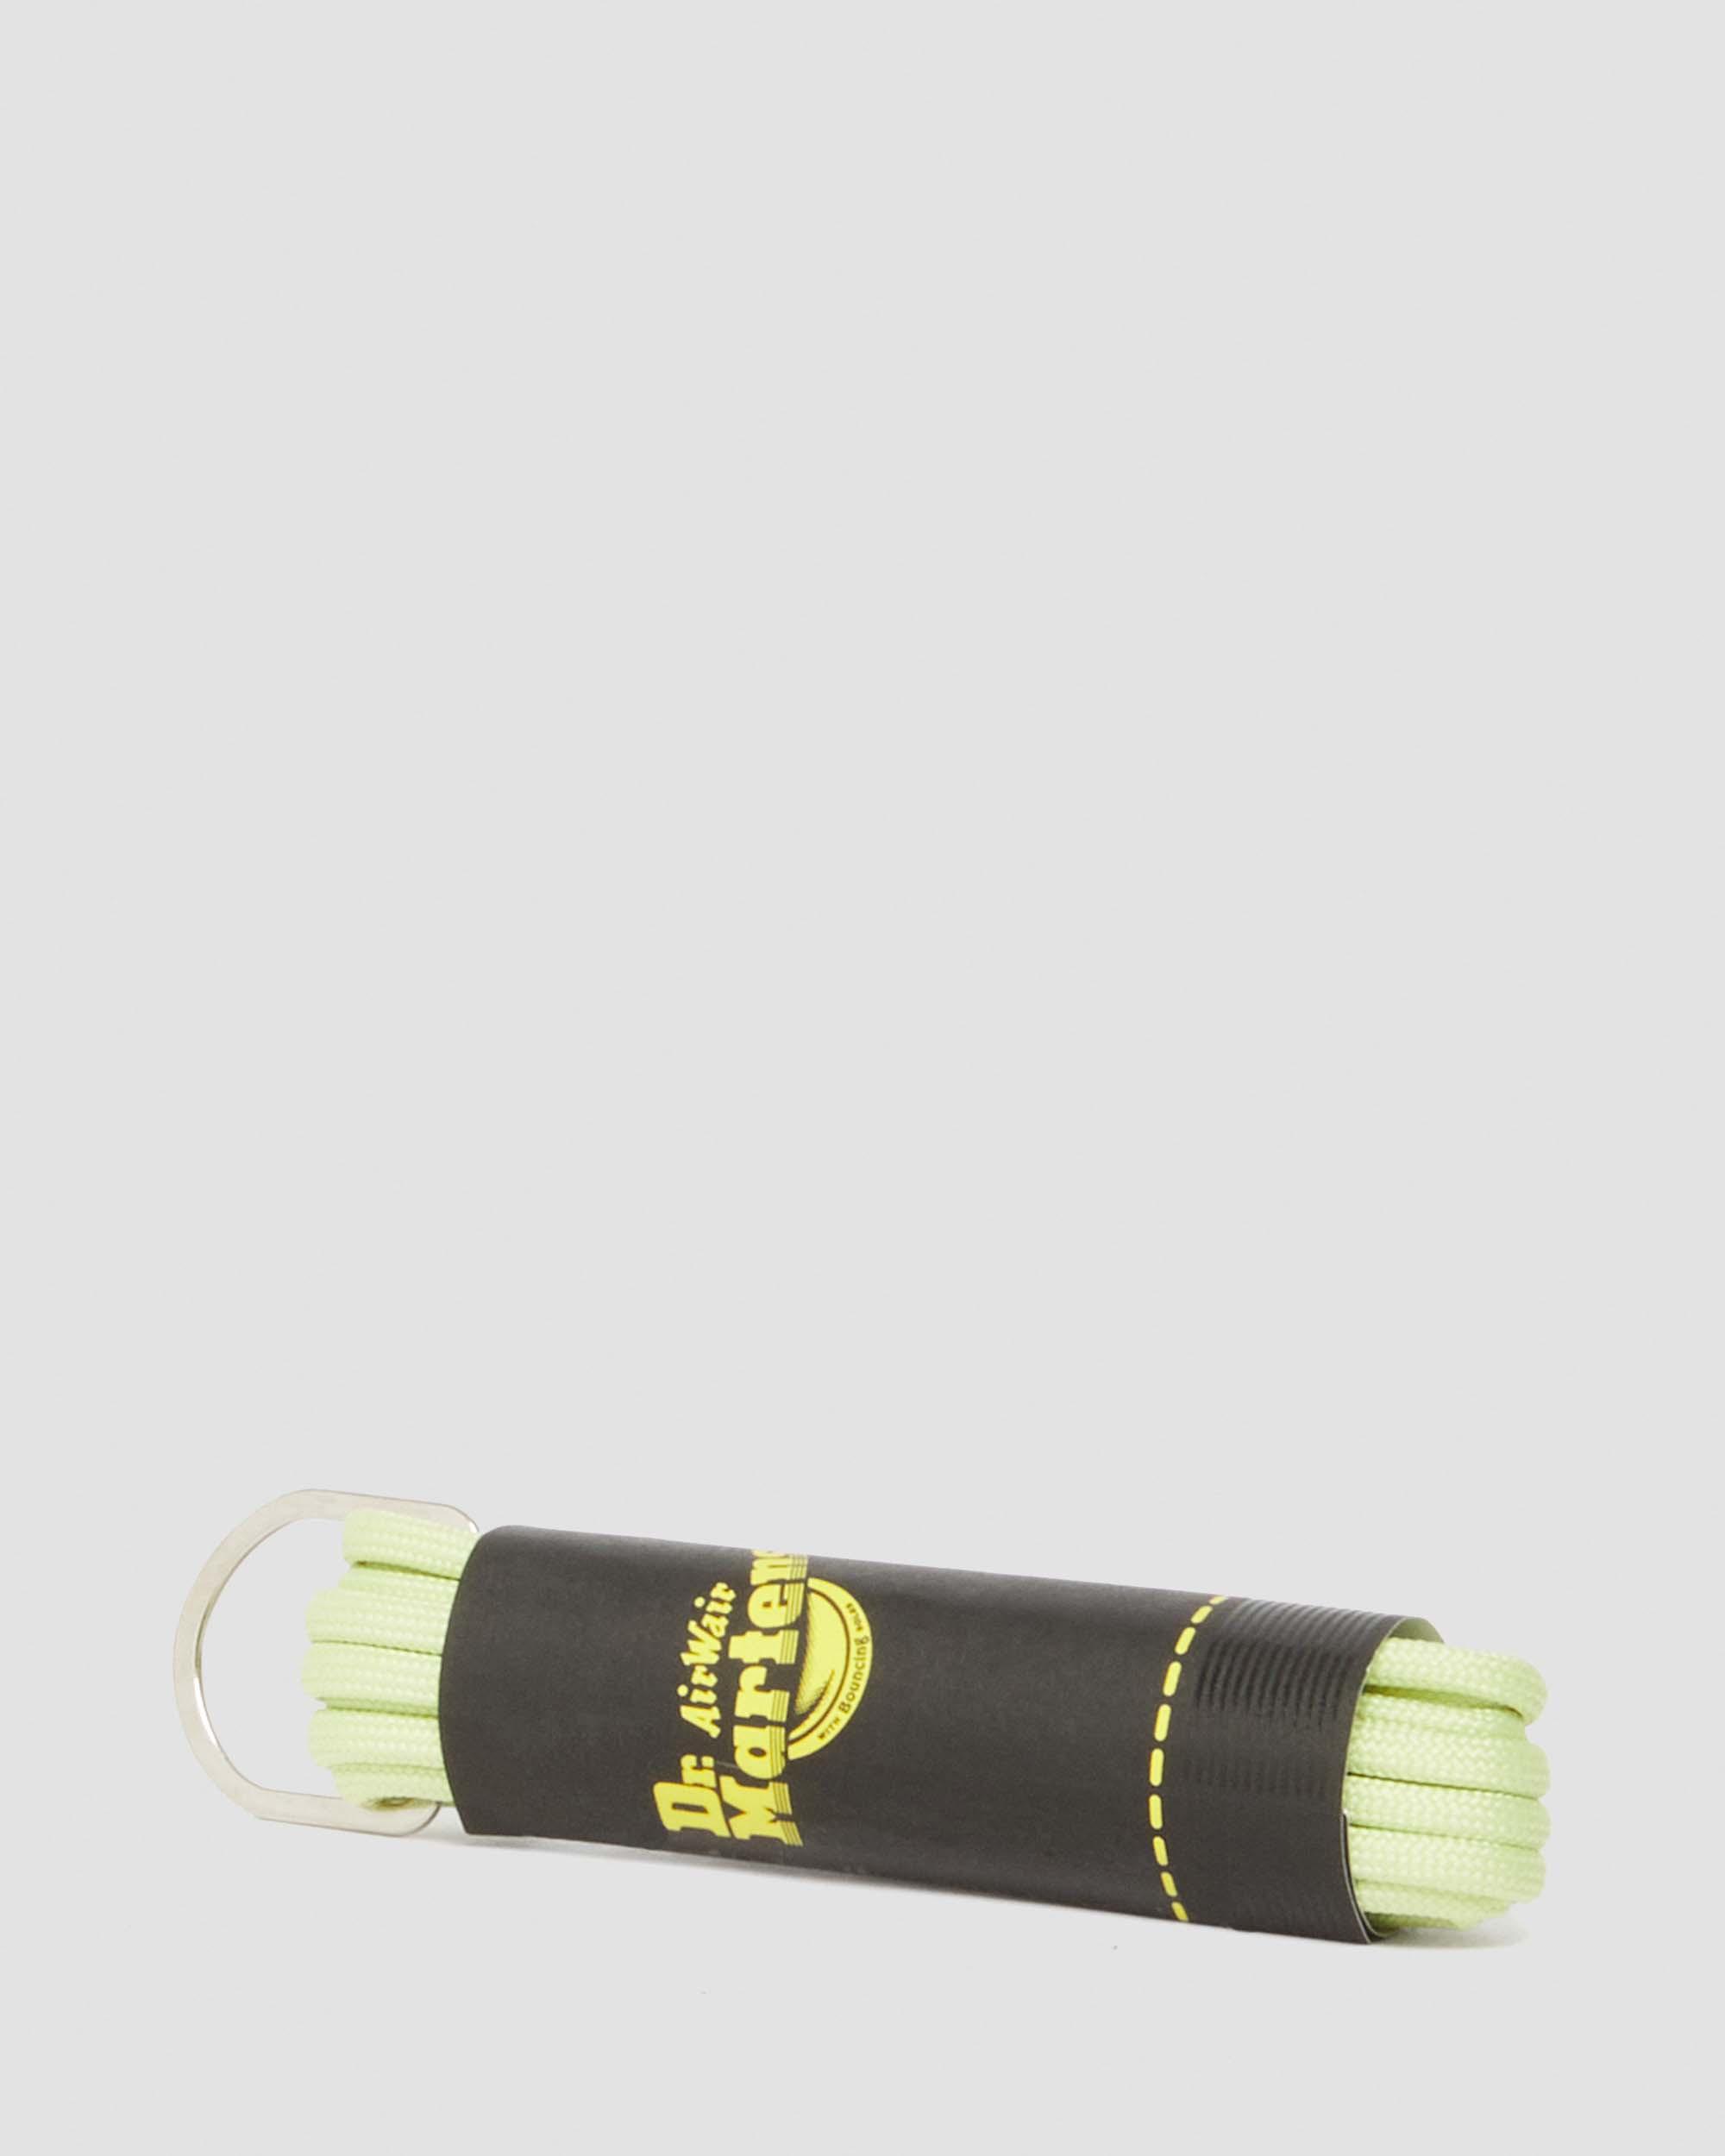 Dr. Martens' 55 Inch Round Shoe Laces (8-10 Eye) In Green